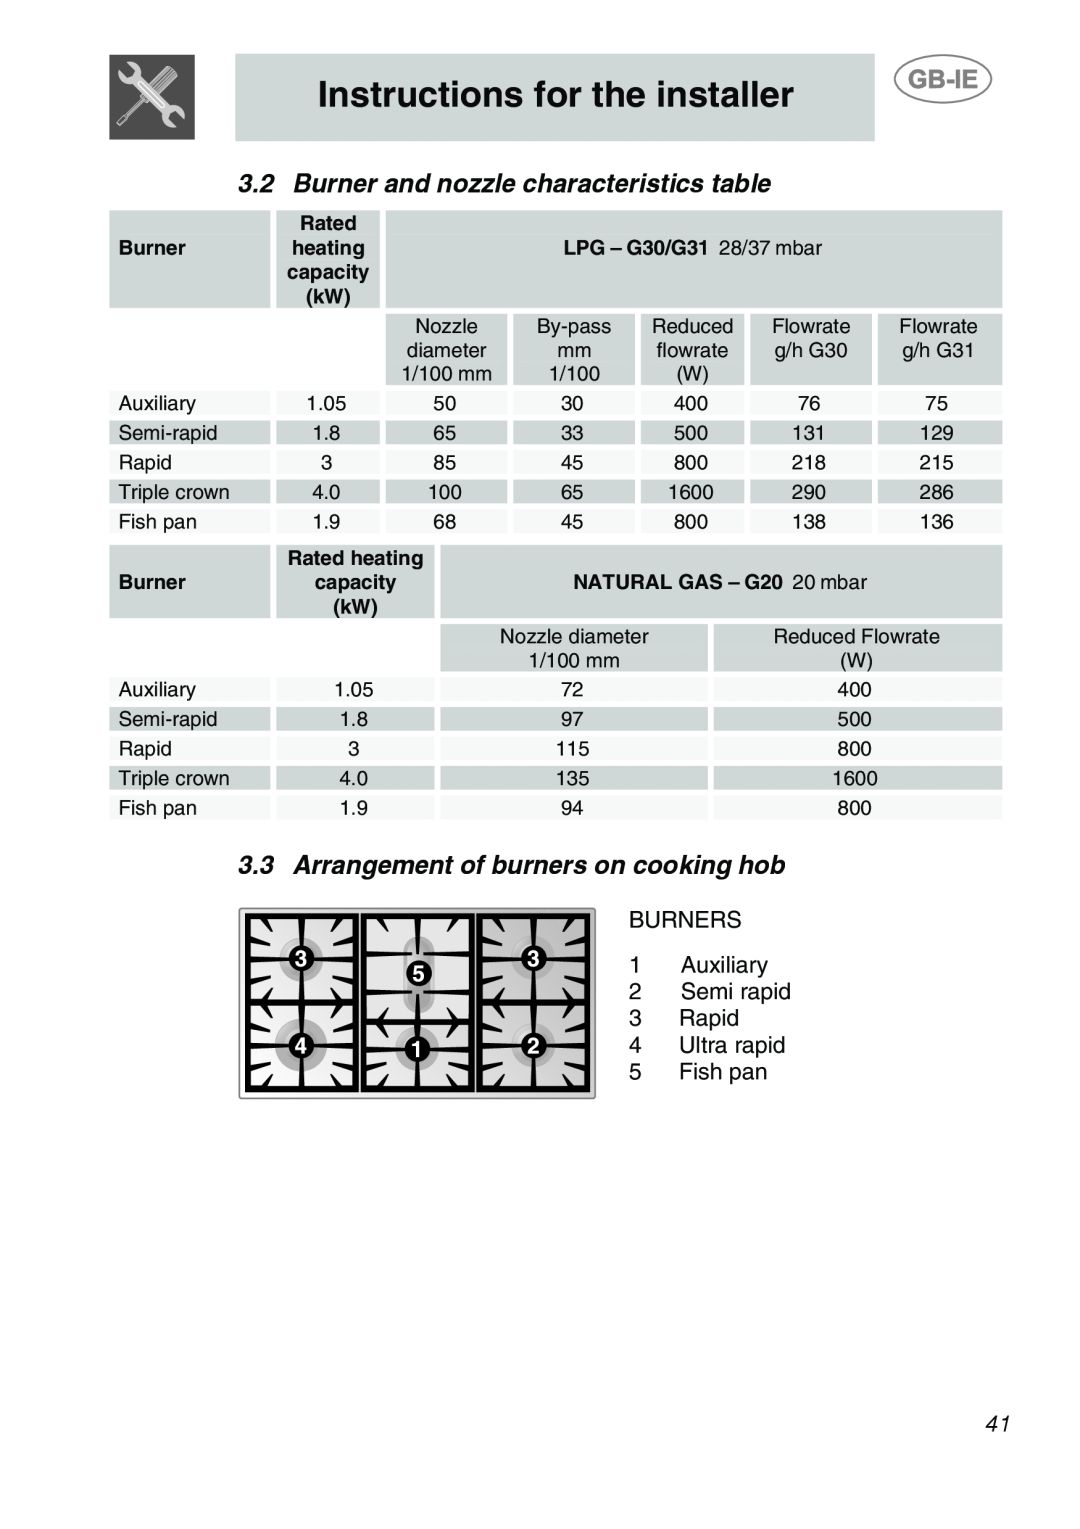 Smeg A1-6 Burner and nozzle characteristics table, Arrangement of burners on cooking hob, Instructions for the installer 